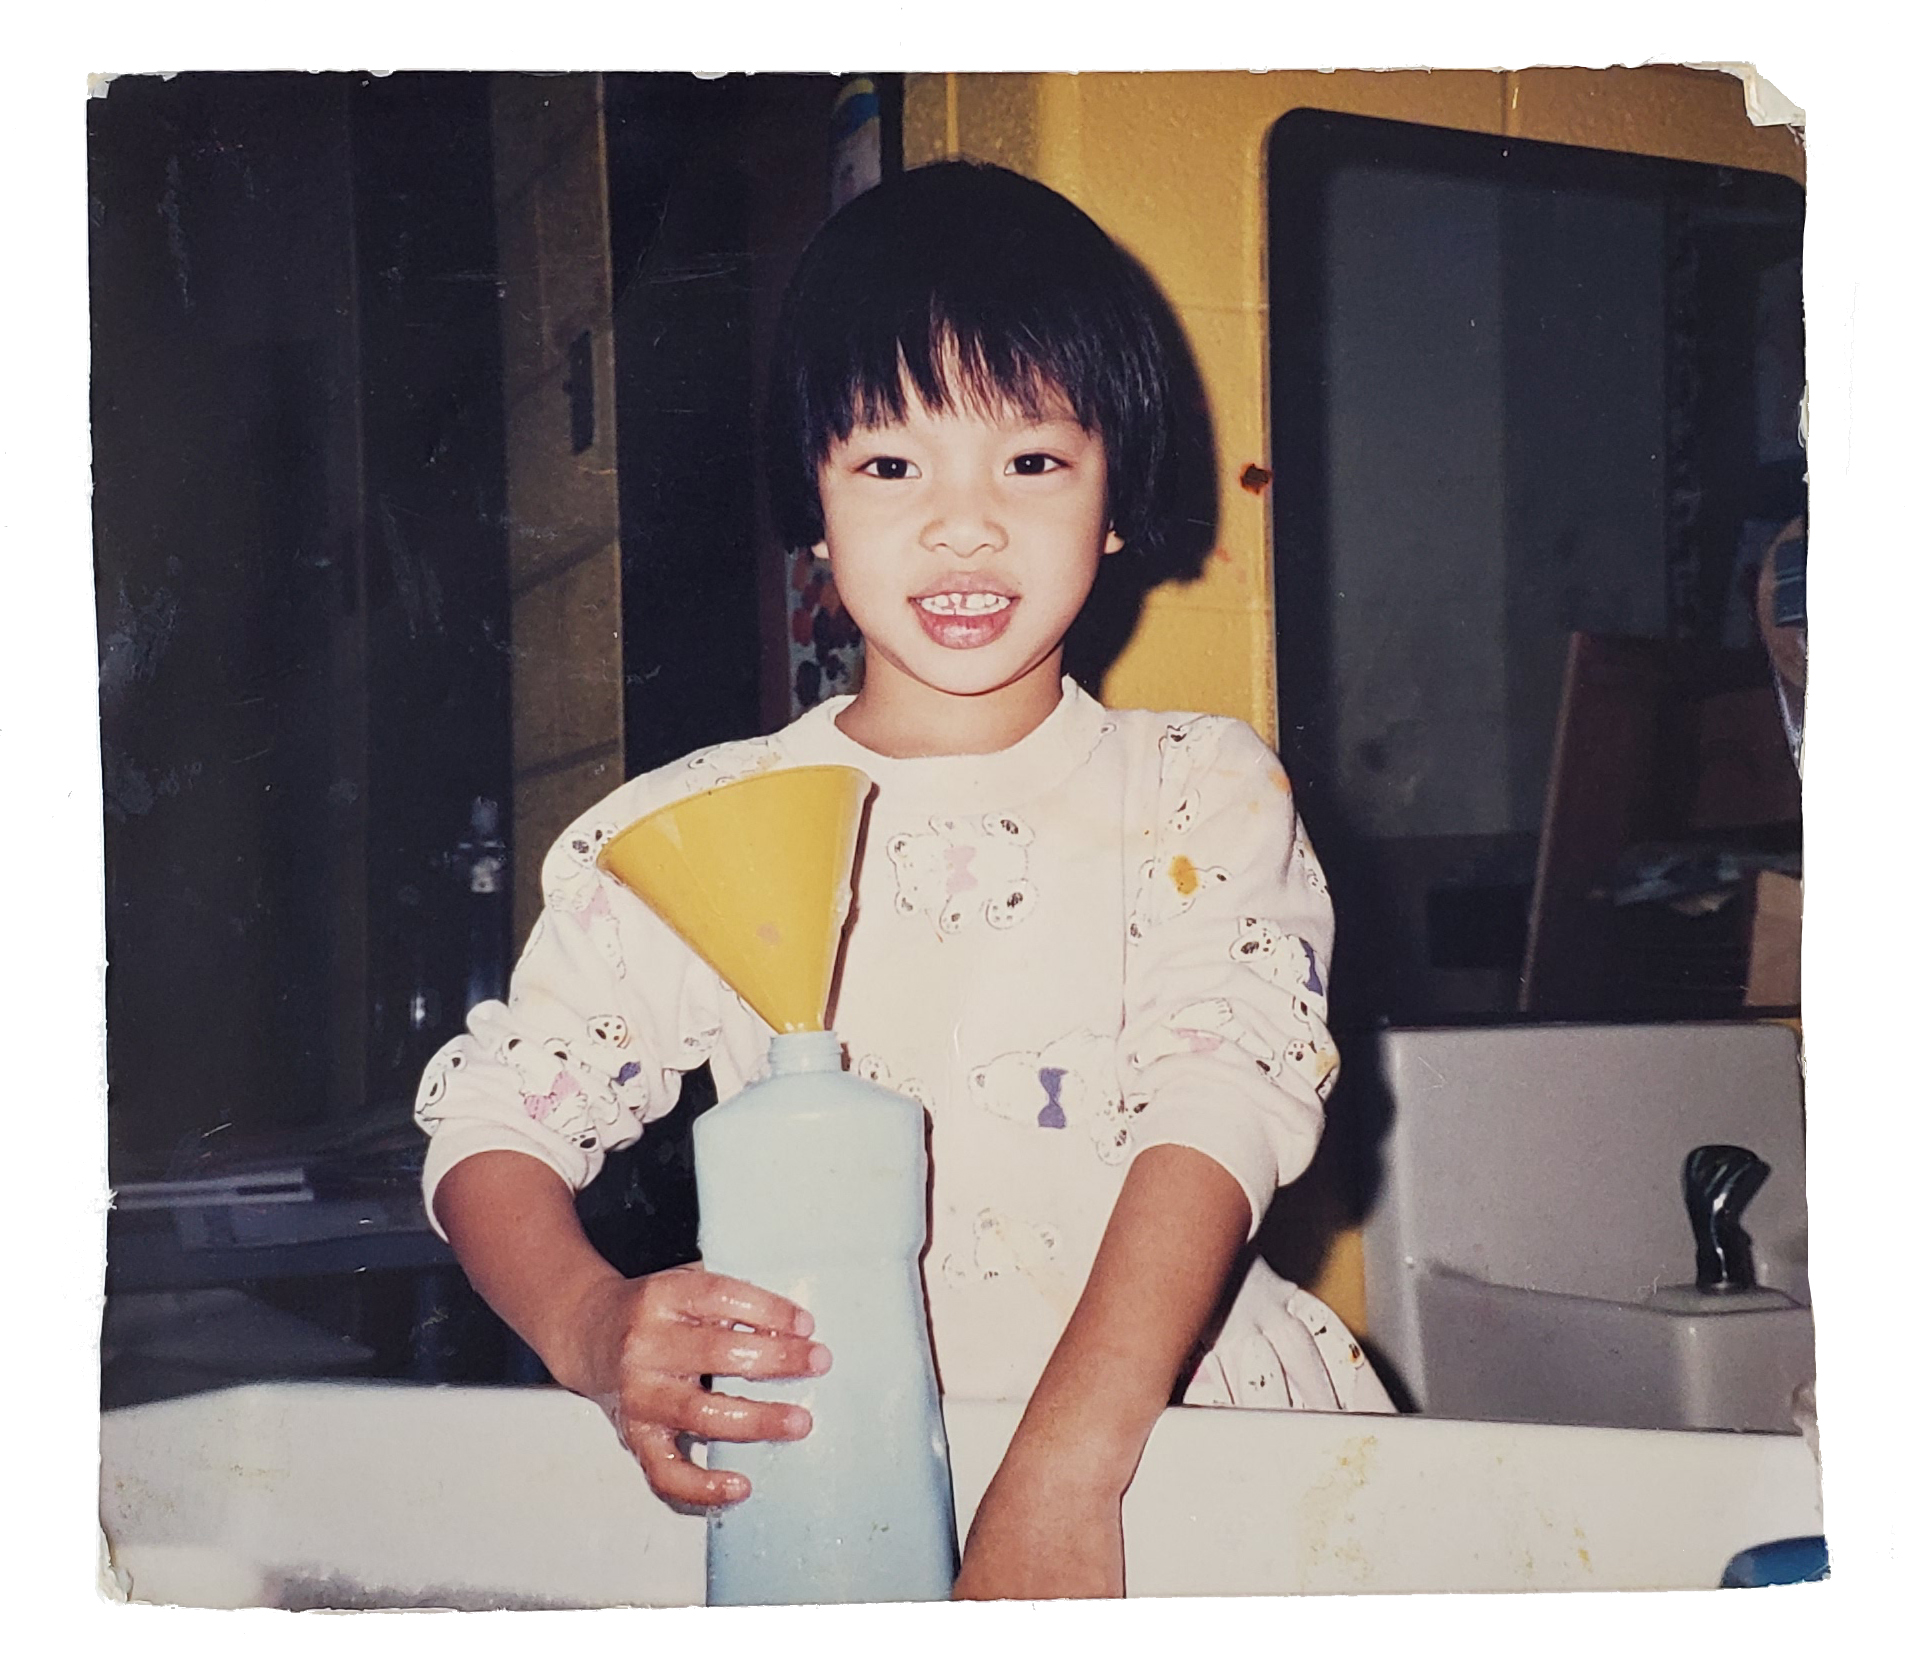 Jessica Hoang playing in the water station during elementary school.